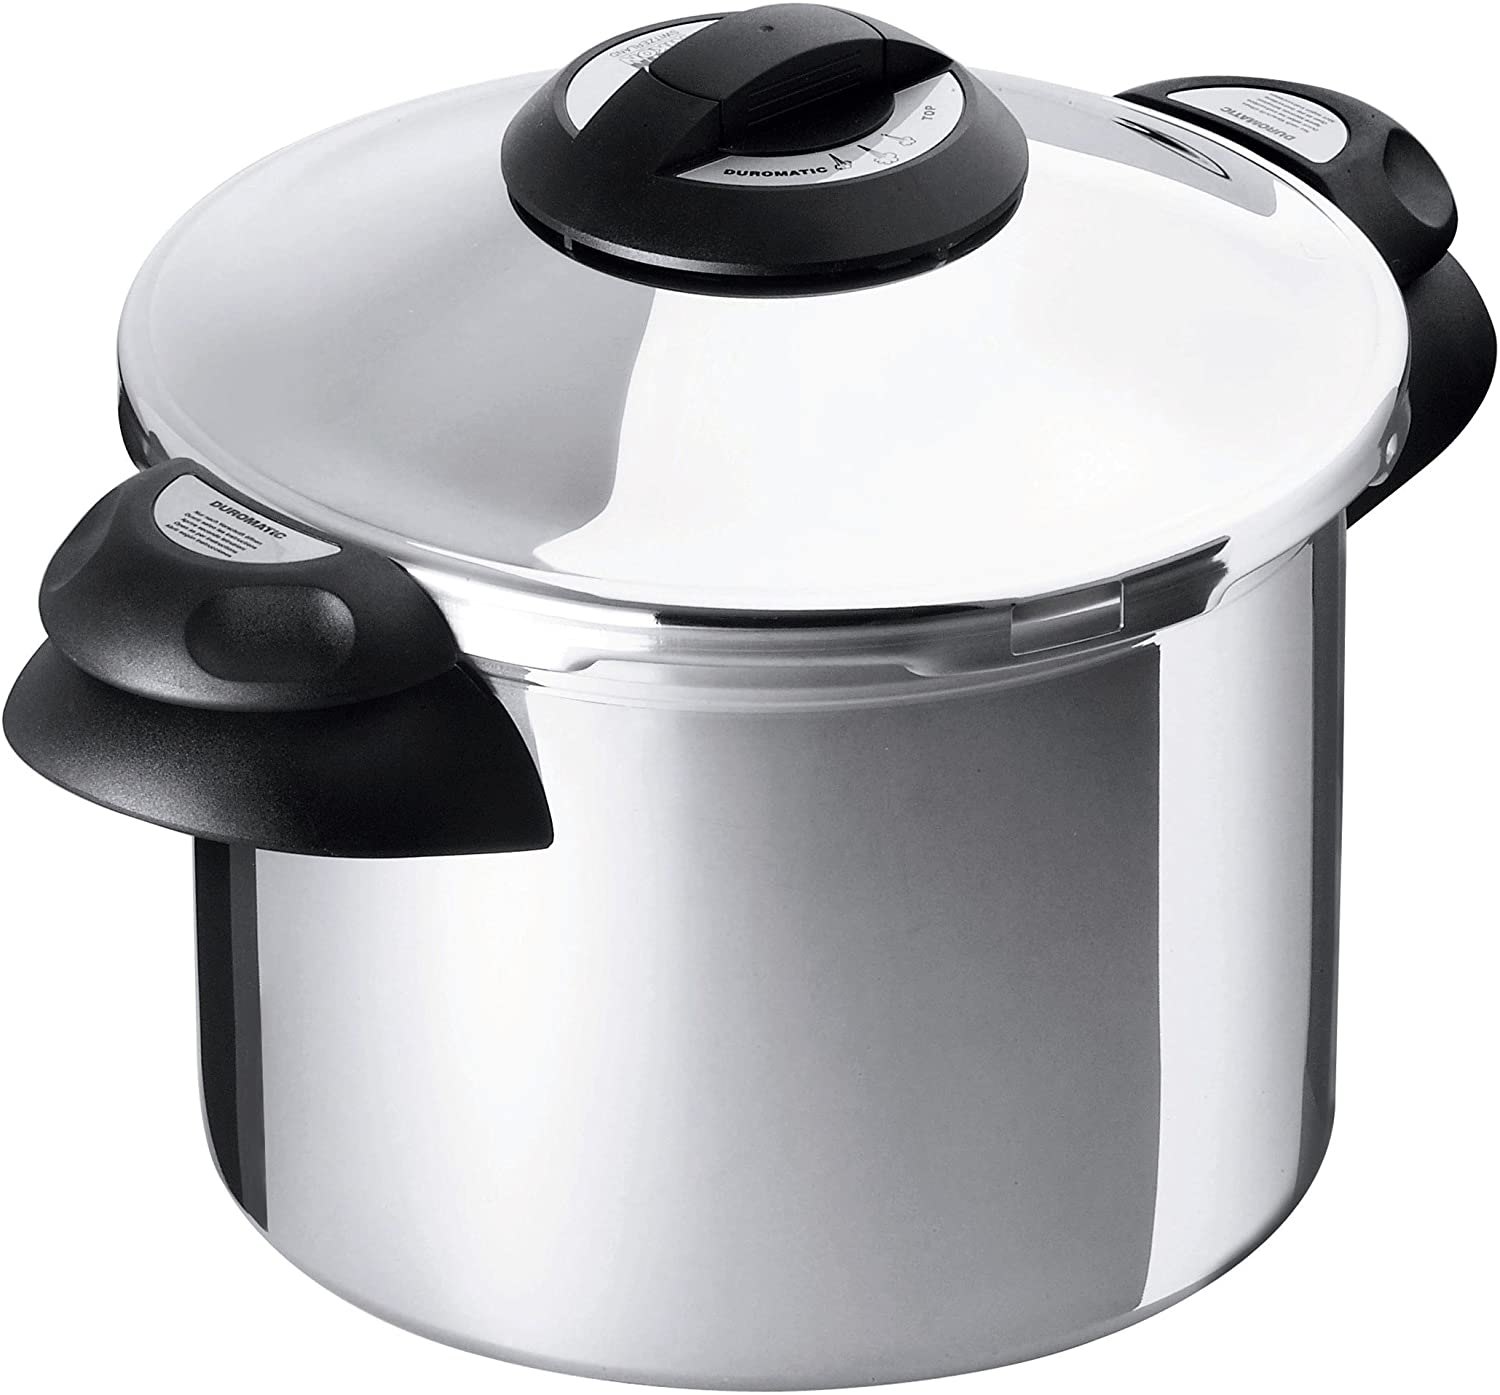 Kuhn Rikon Duromatic Top Pressure Cooker With Side Grips (24 cm), 4.0 Litre